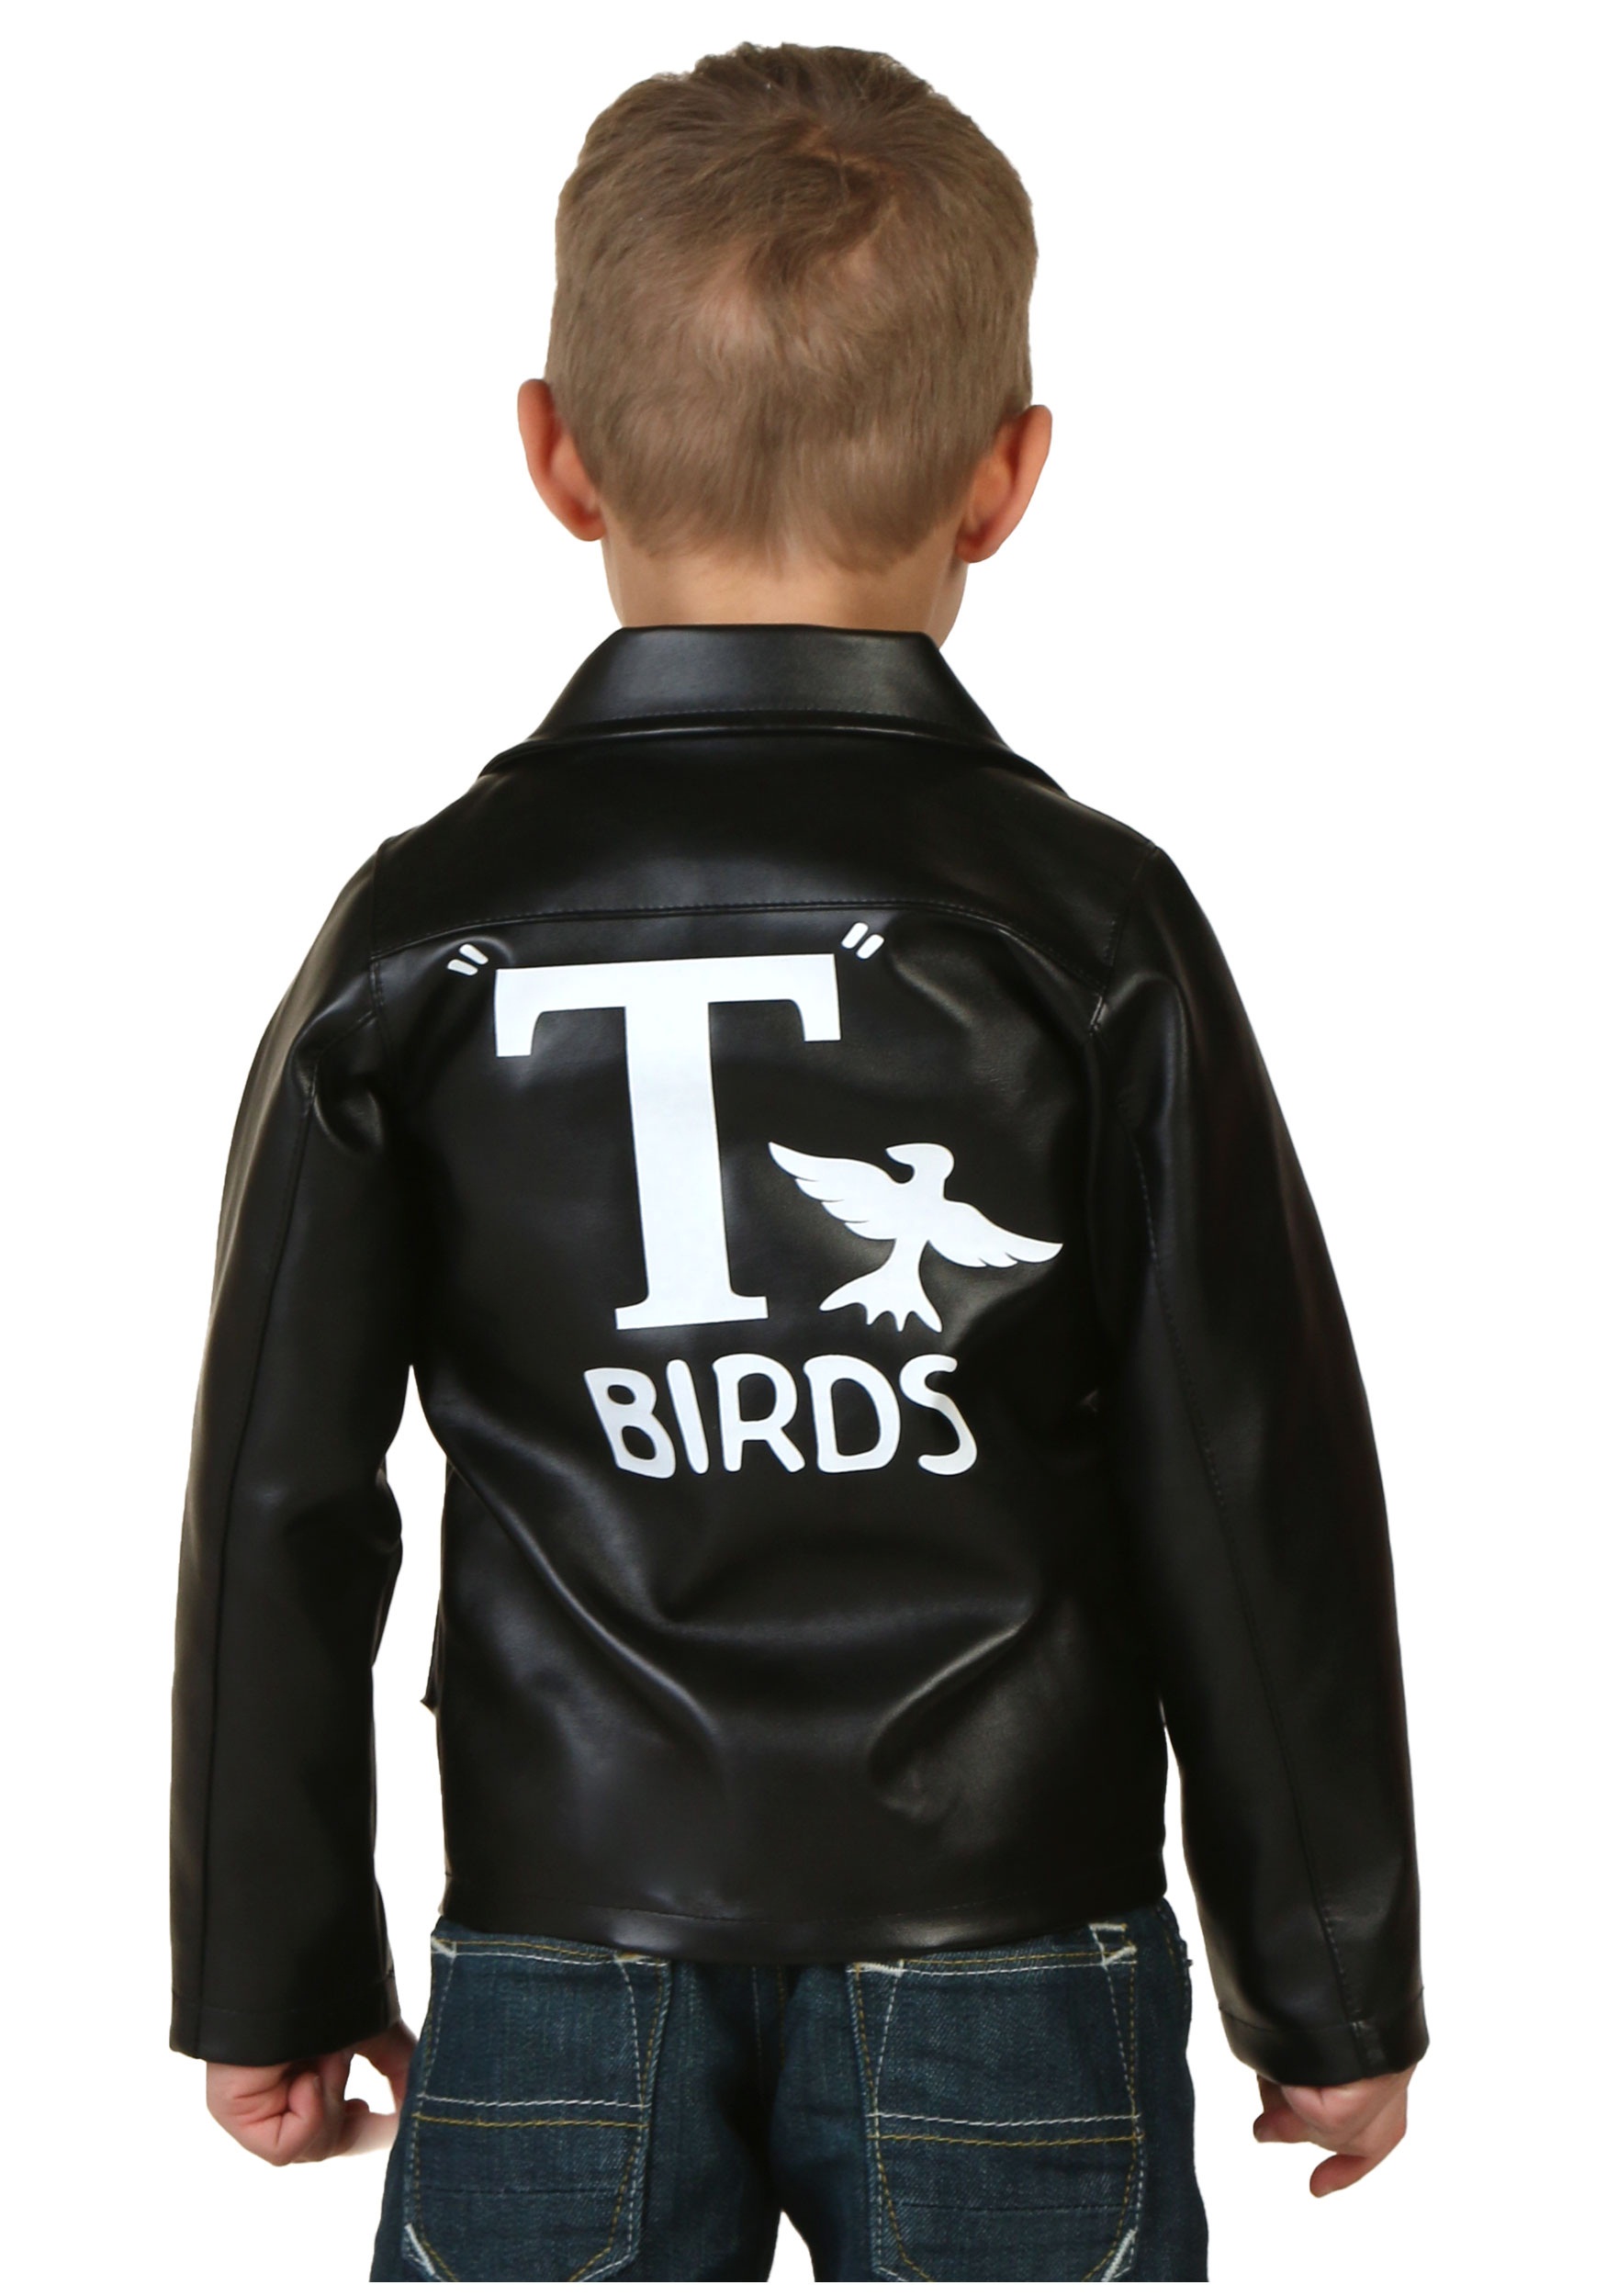 Toddler Grease T Birds Jacket Costume Officially Licensed Costume